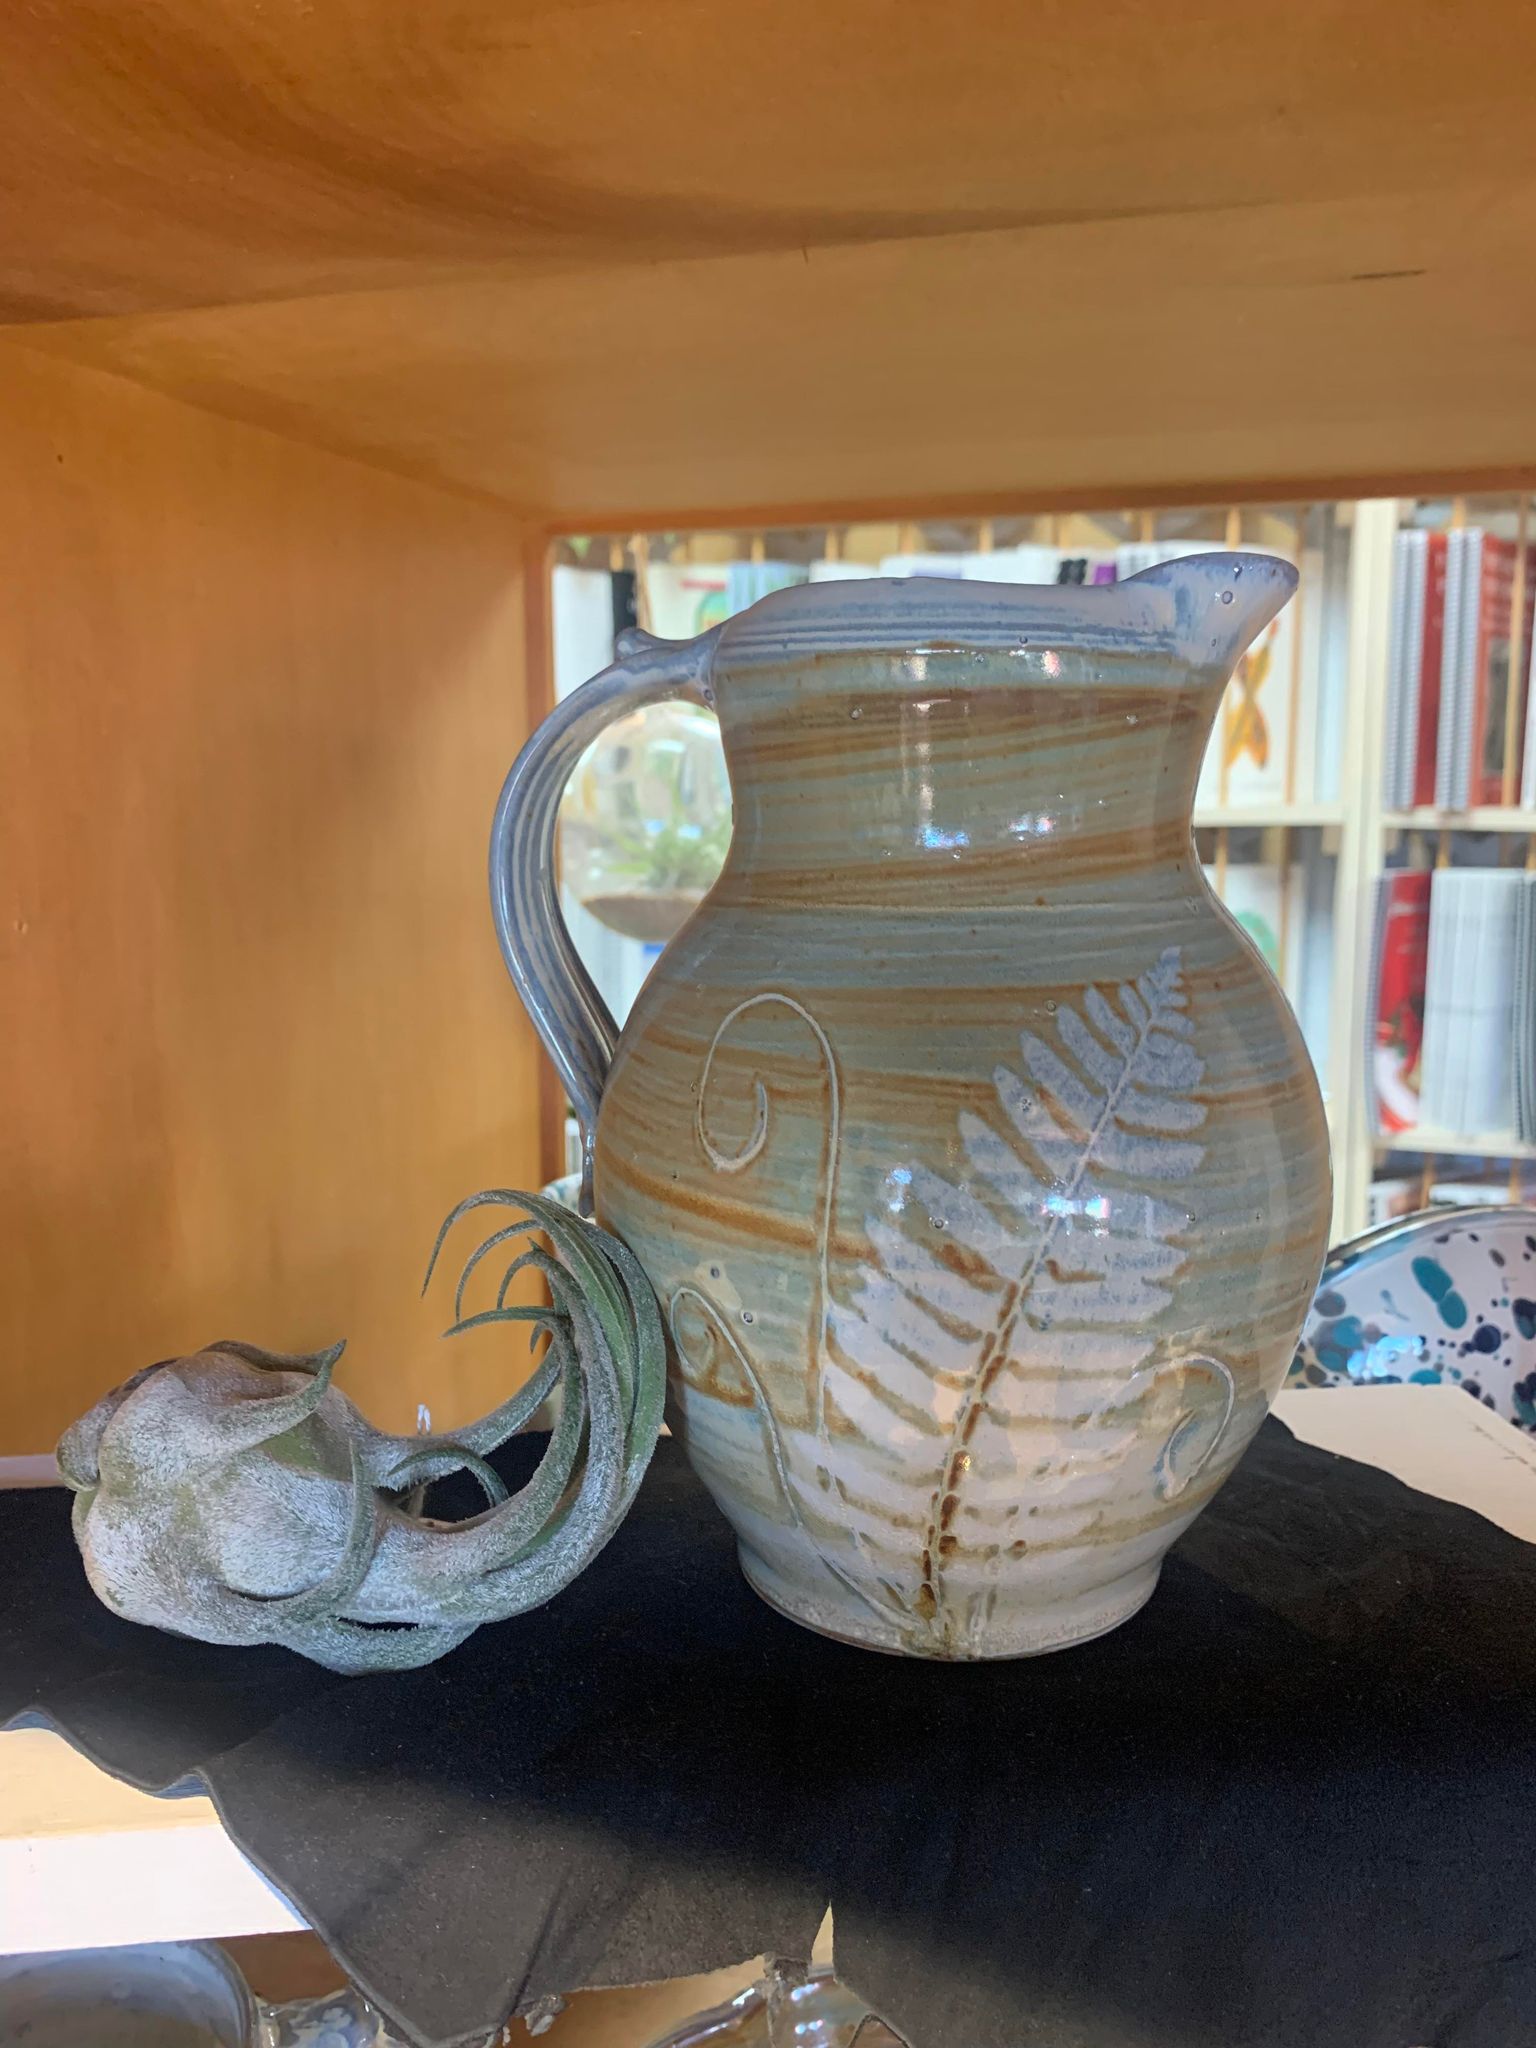 A Perry Munn Pottery Fern Pitcher adorned with delicate ferns.